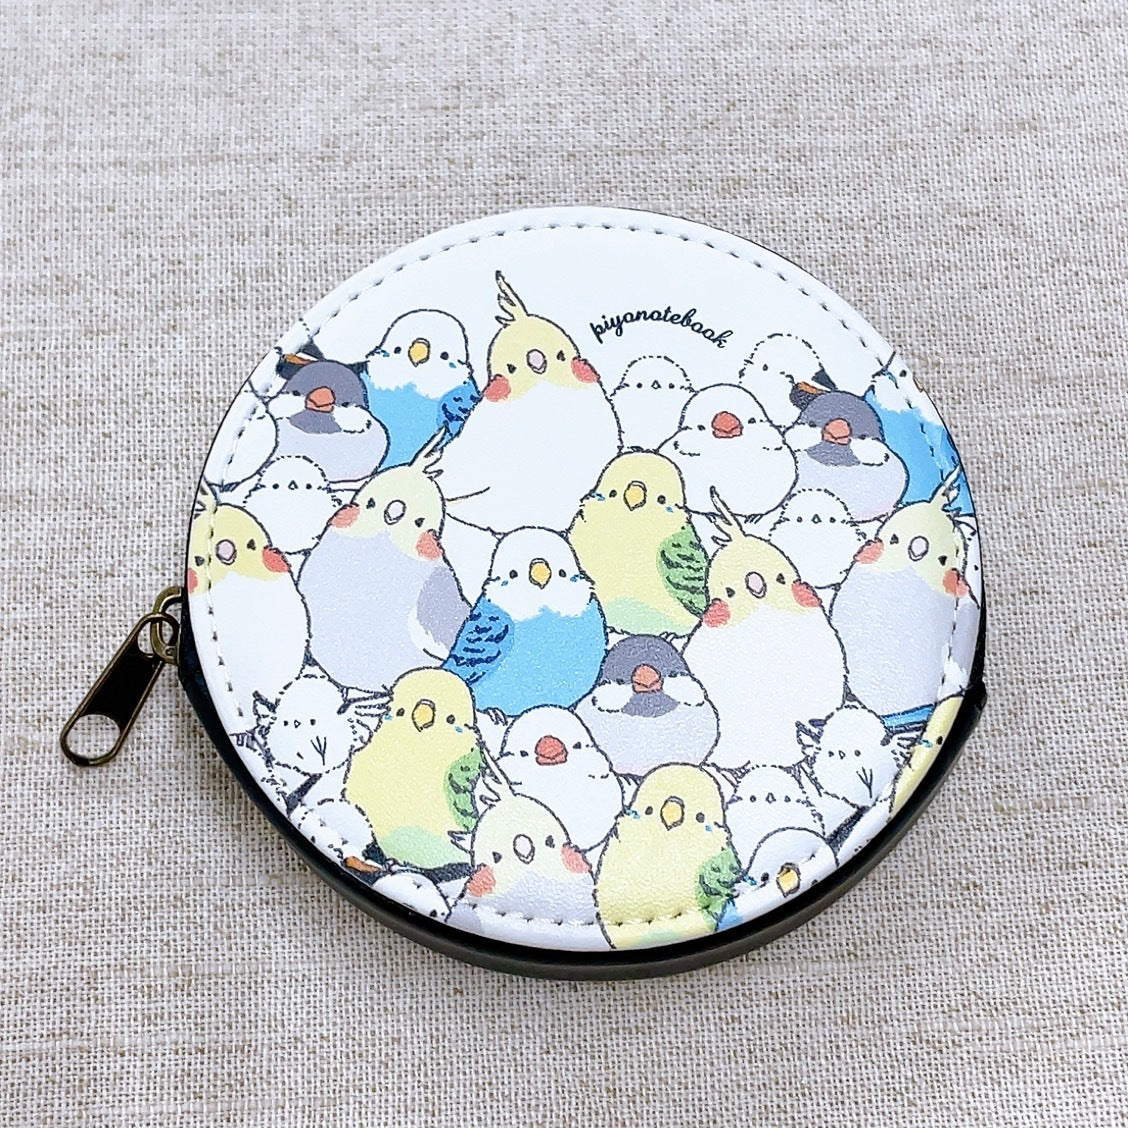 Budgie Cockatiel Java Sparrow Long-tailed Tit Coin Purse Pouch